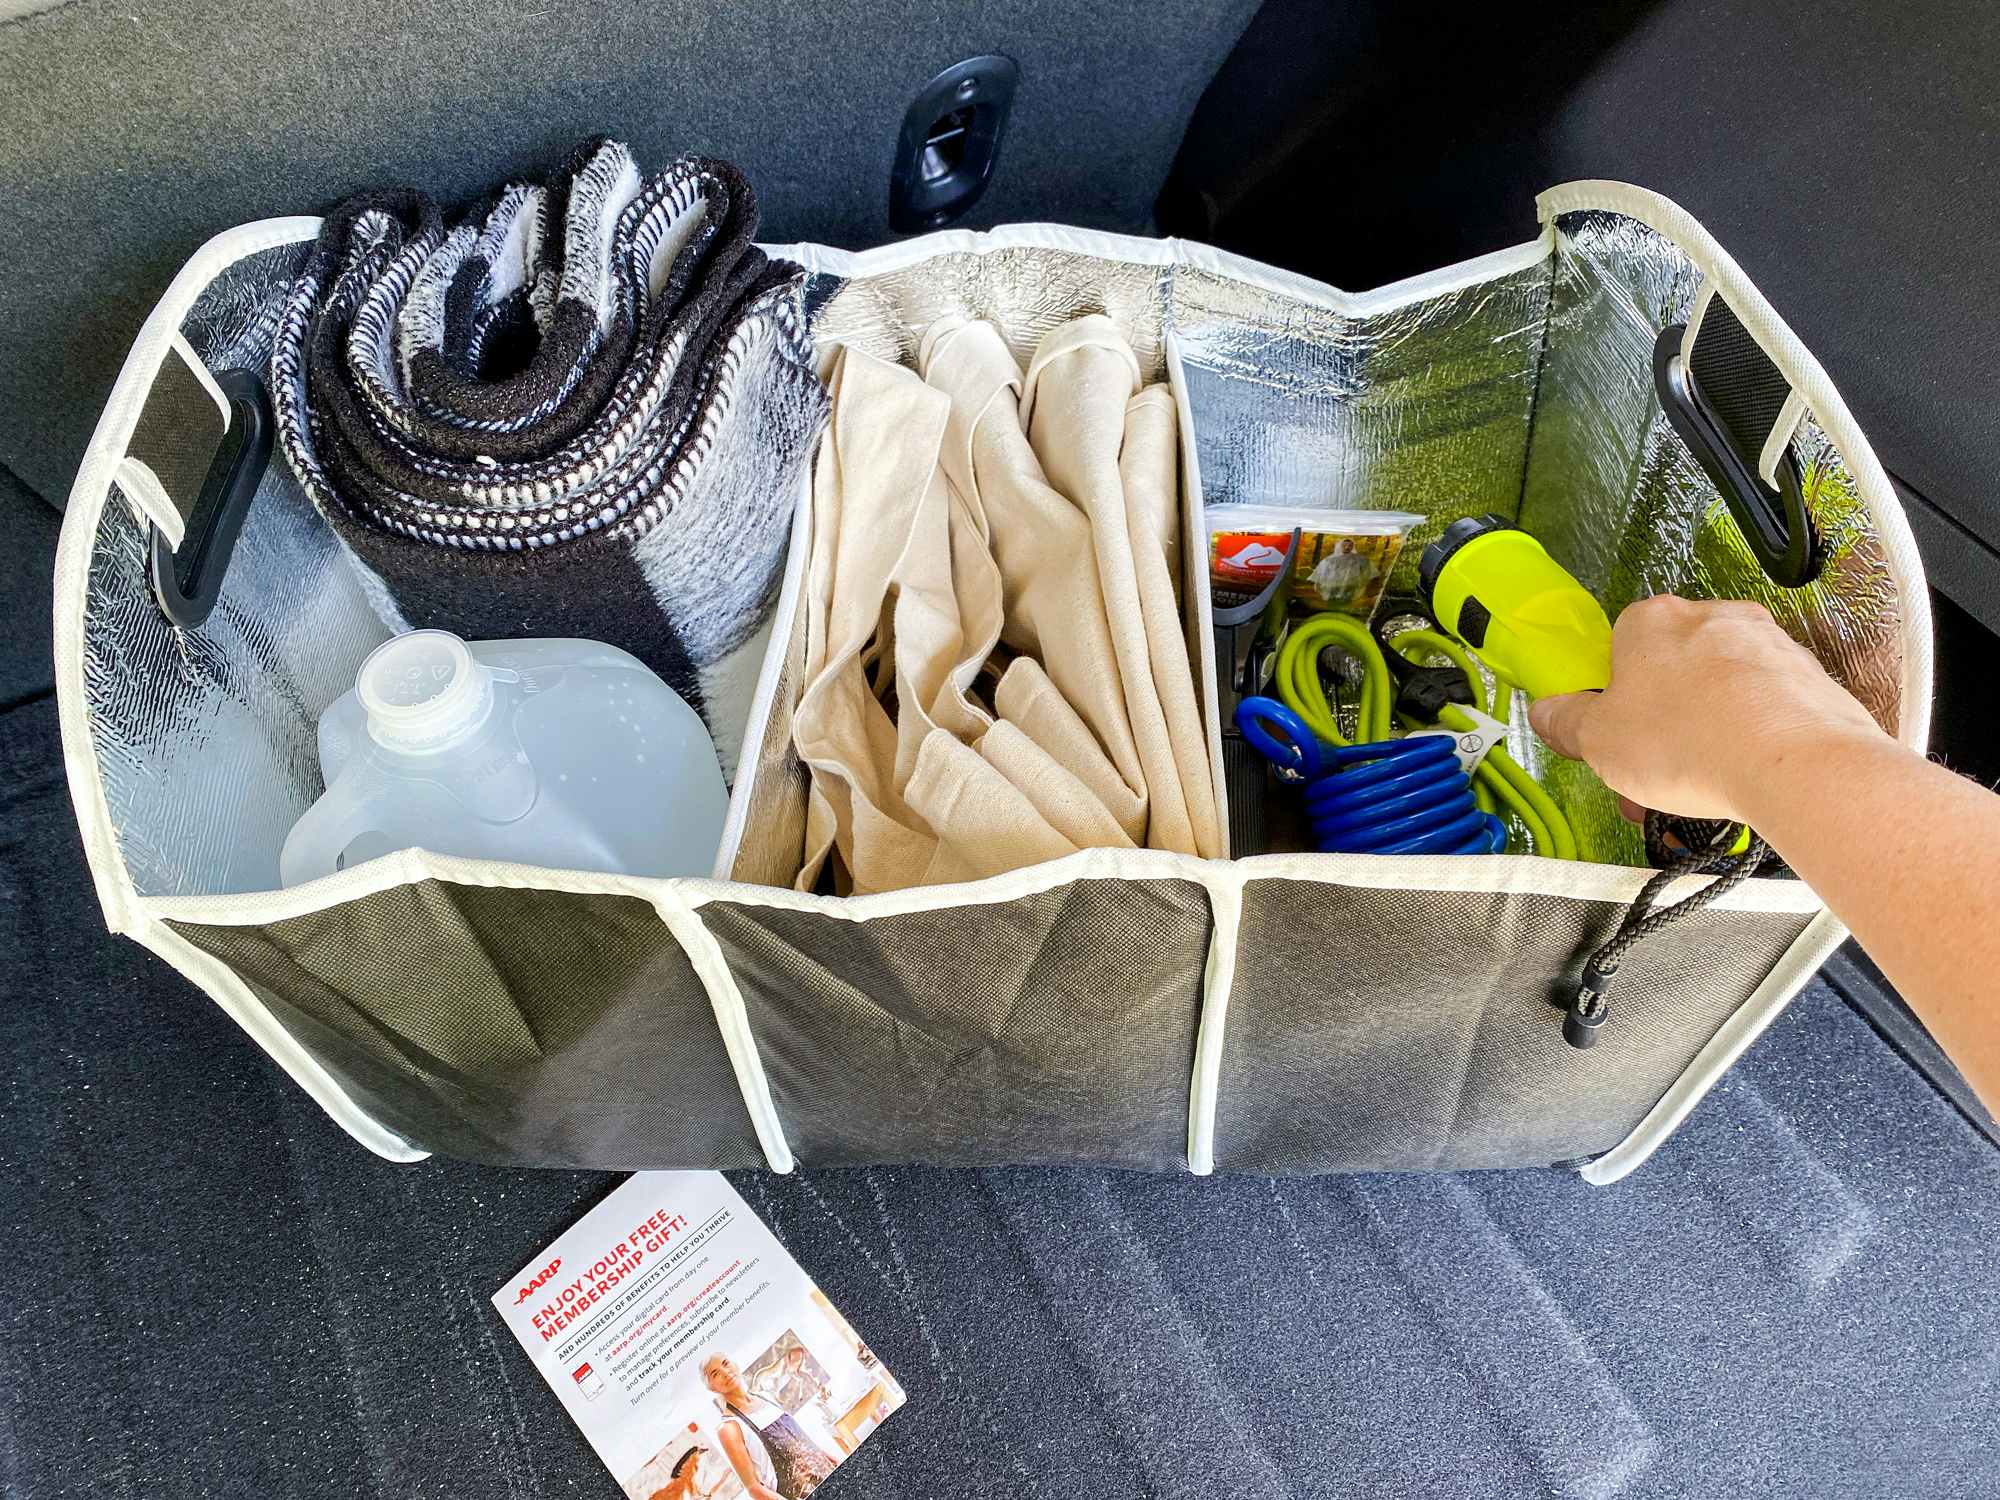 AARP Flash Sale: Only $9/Year Plus Free Trunk Organizer